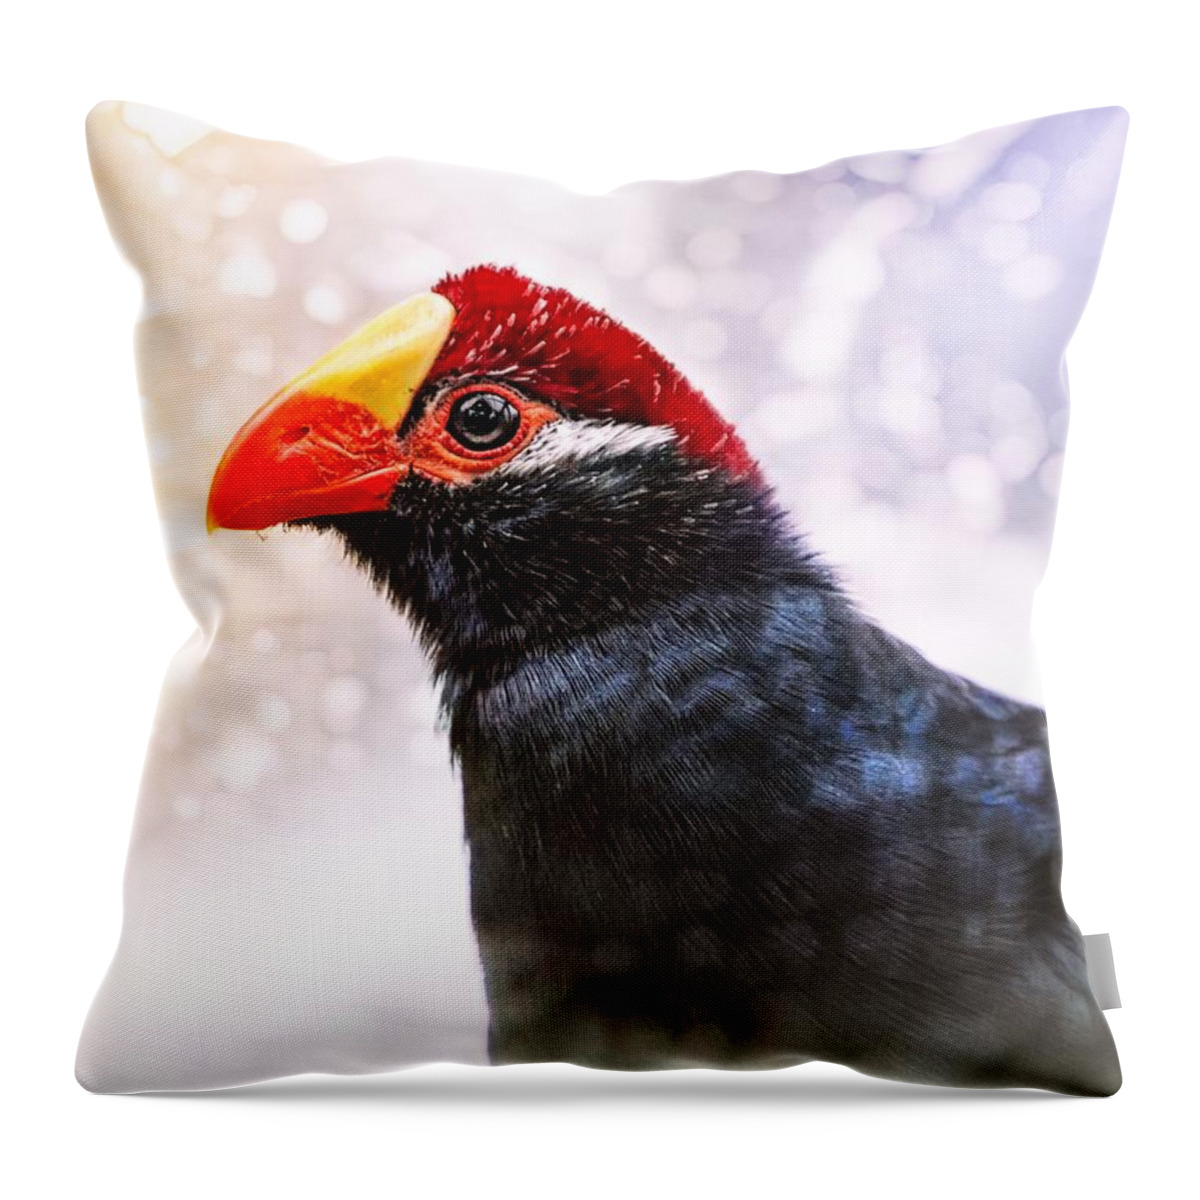 Violet Turaco Throw Pillow featuring the photograph Violet Turaco by Jaroslav Buna